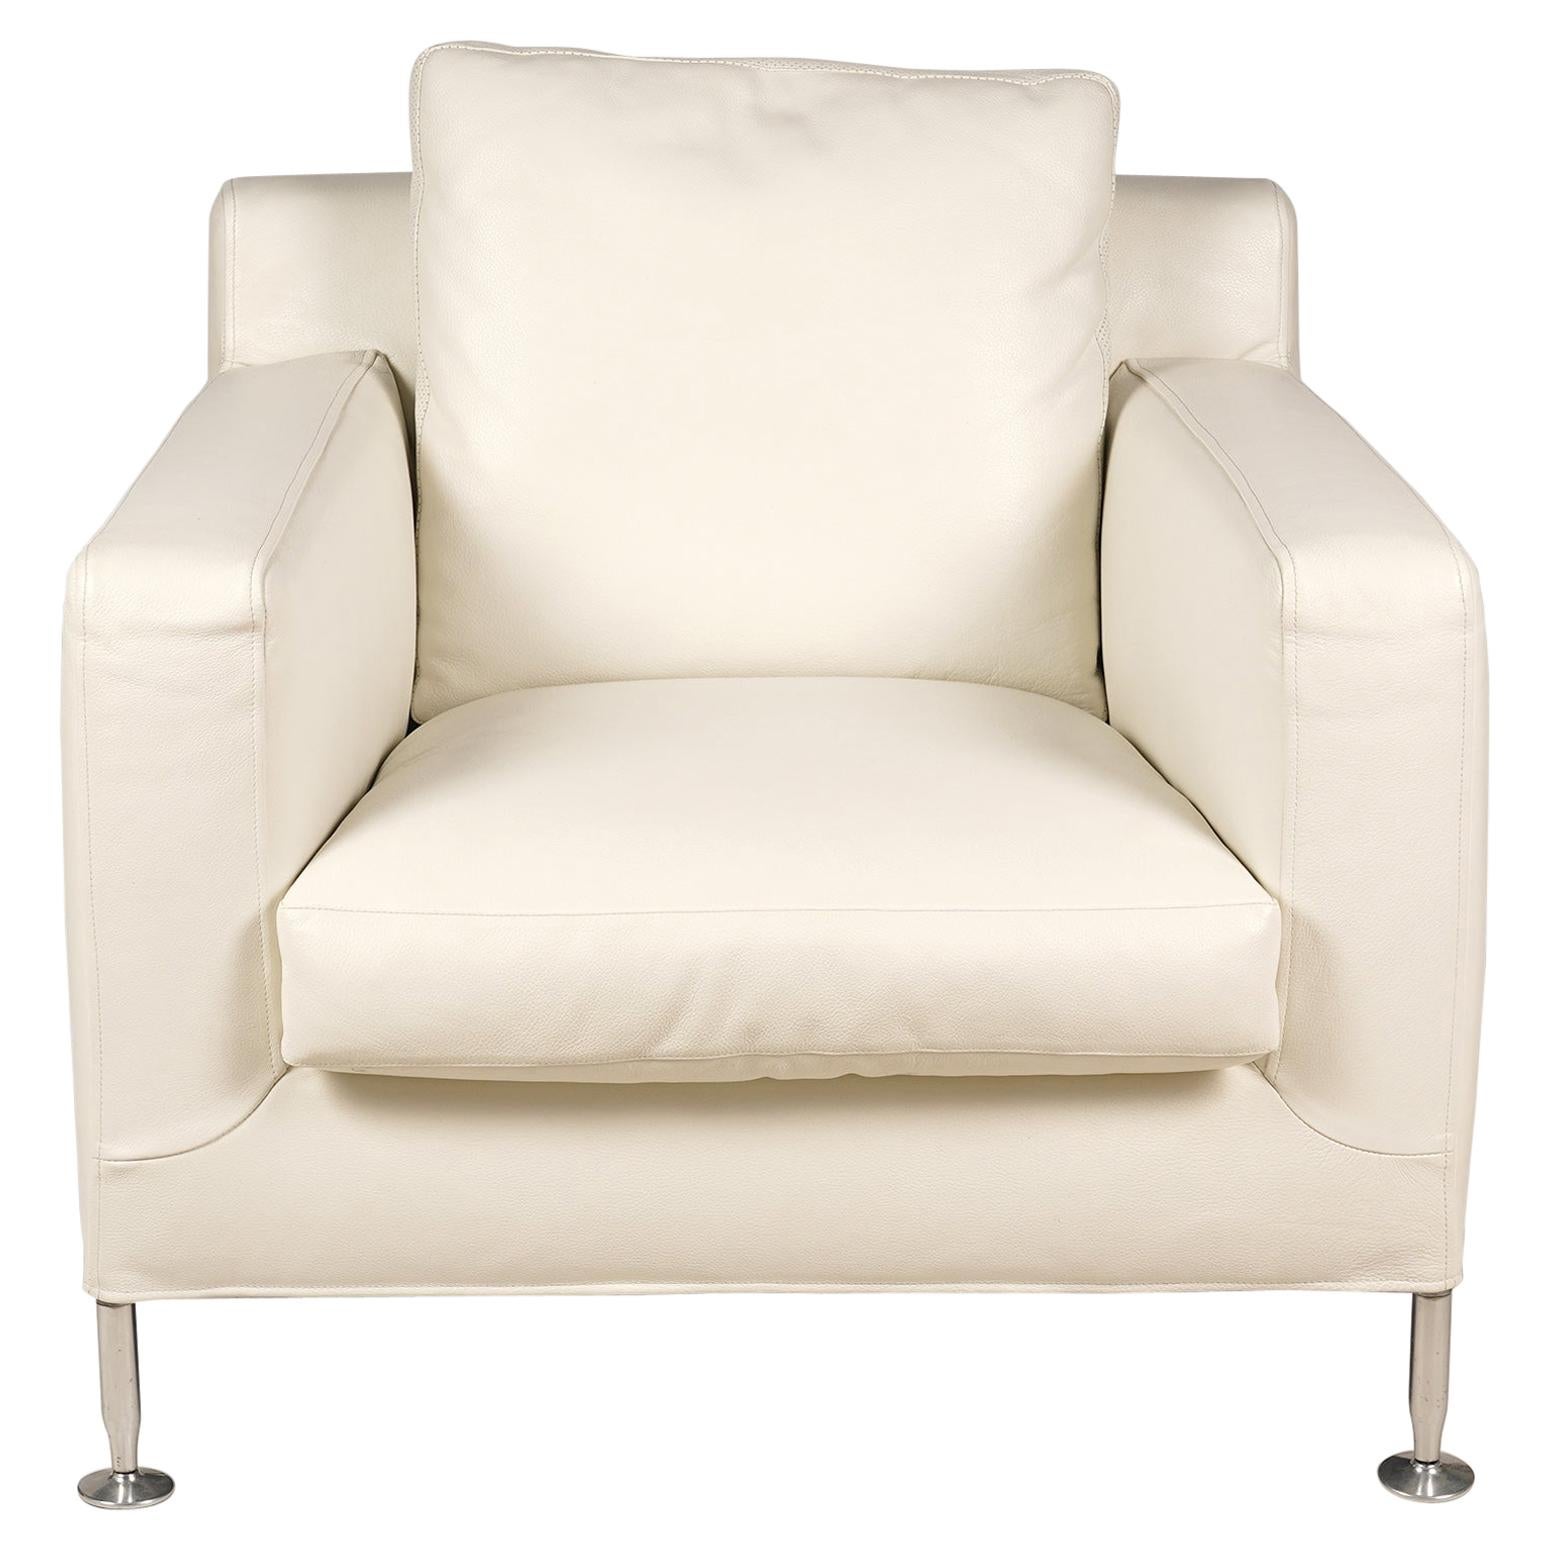 'Harry' White Leather Lounge Chair by Antonio Citterio for B&B Italia